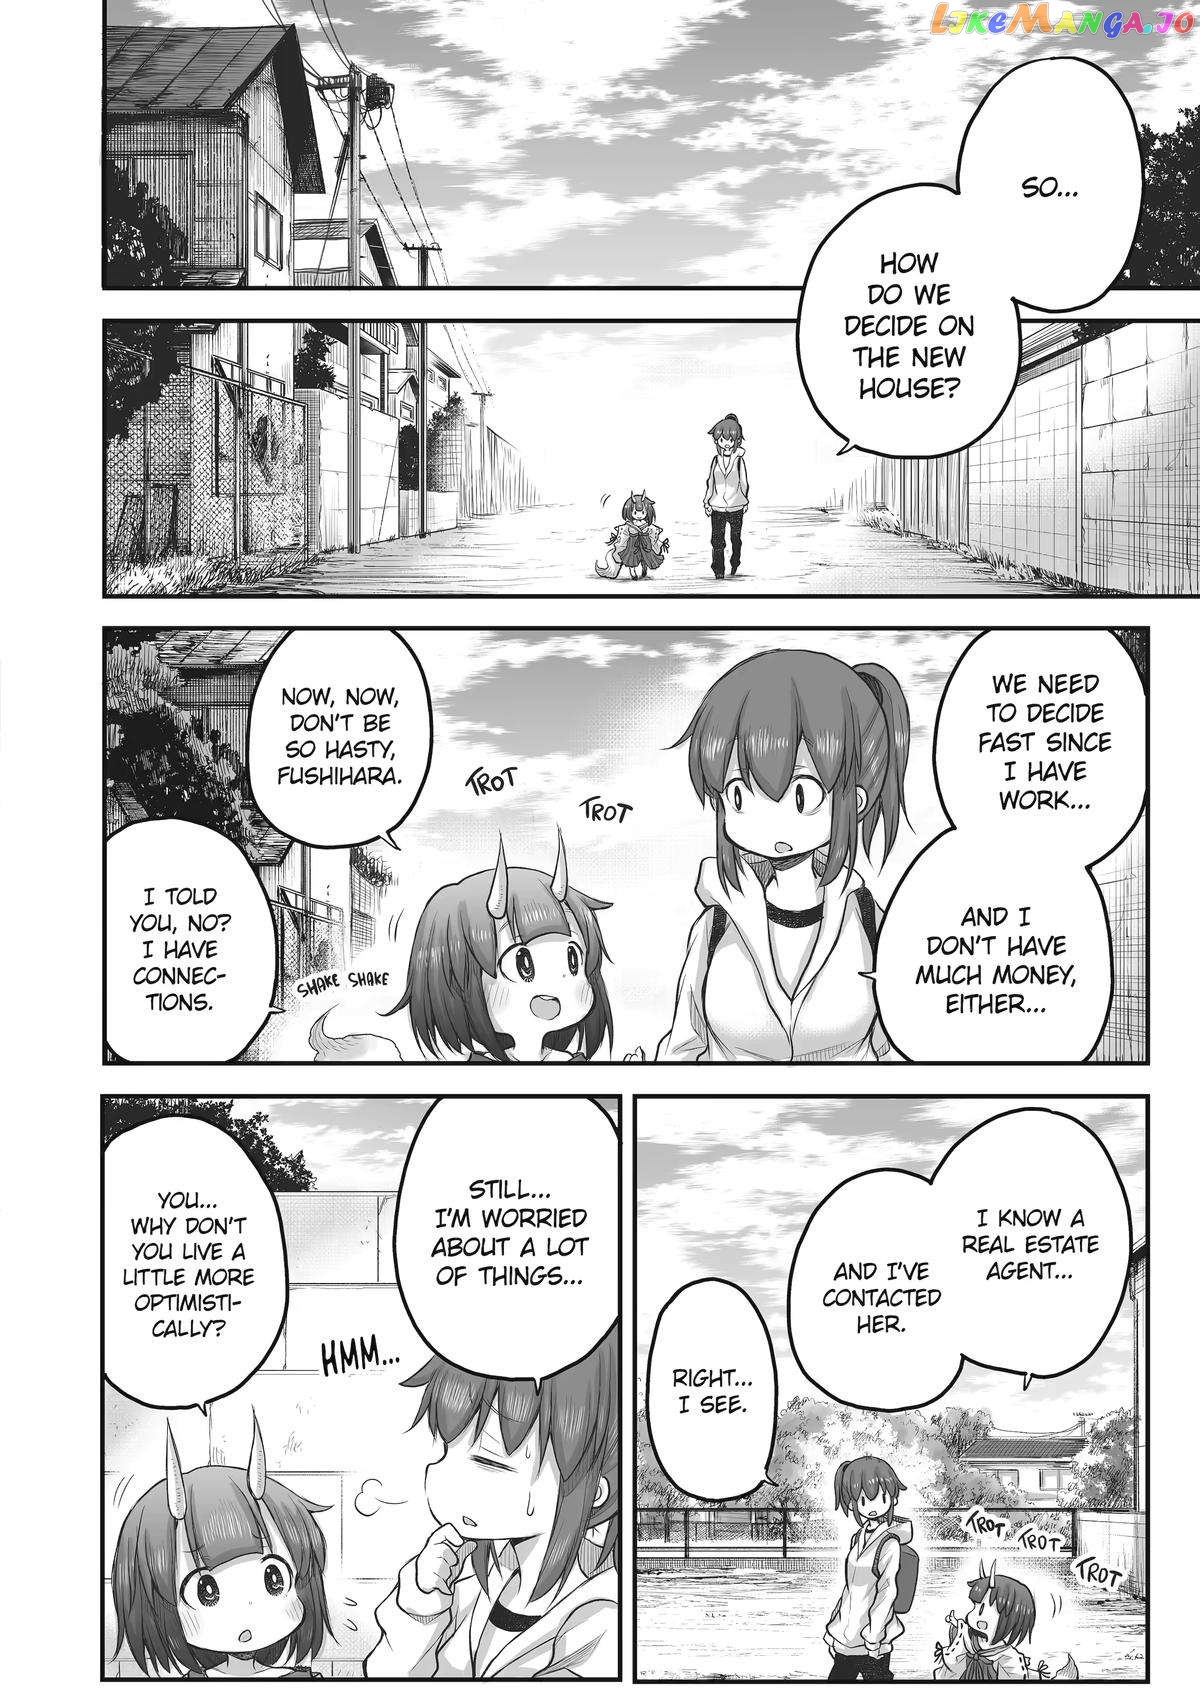 Ms. Corporate Slave Wants to be Healed by a Loli Spirit - chapter 44 - #4